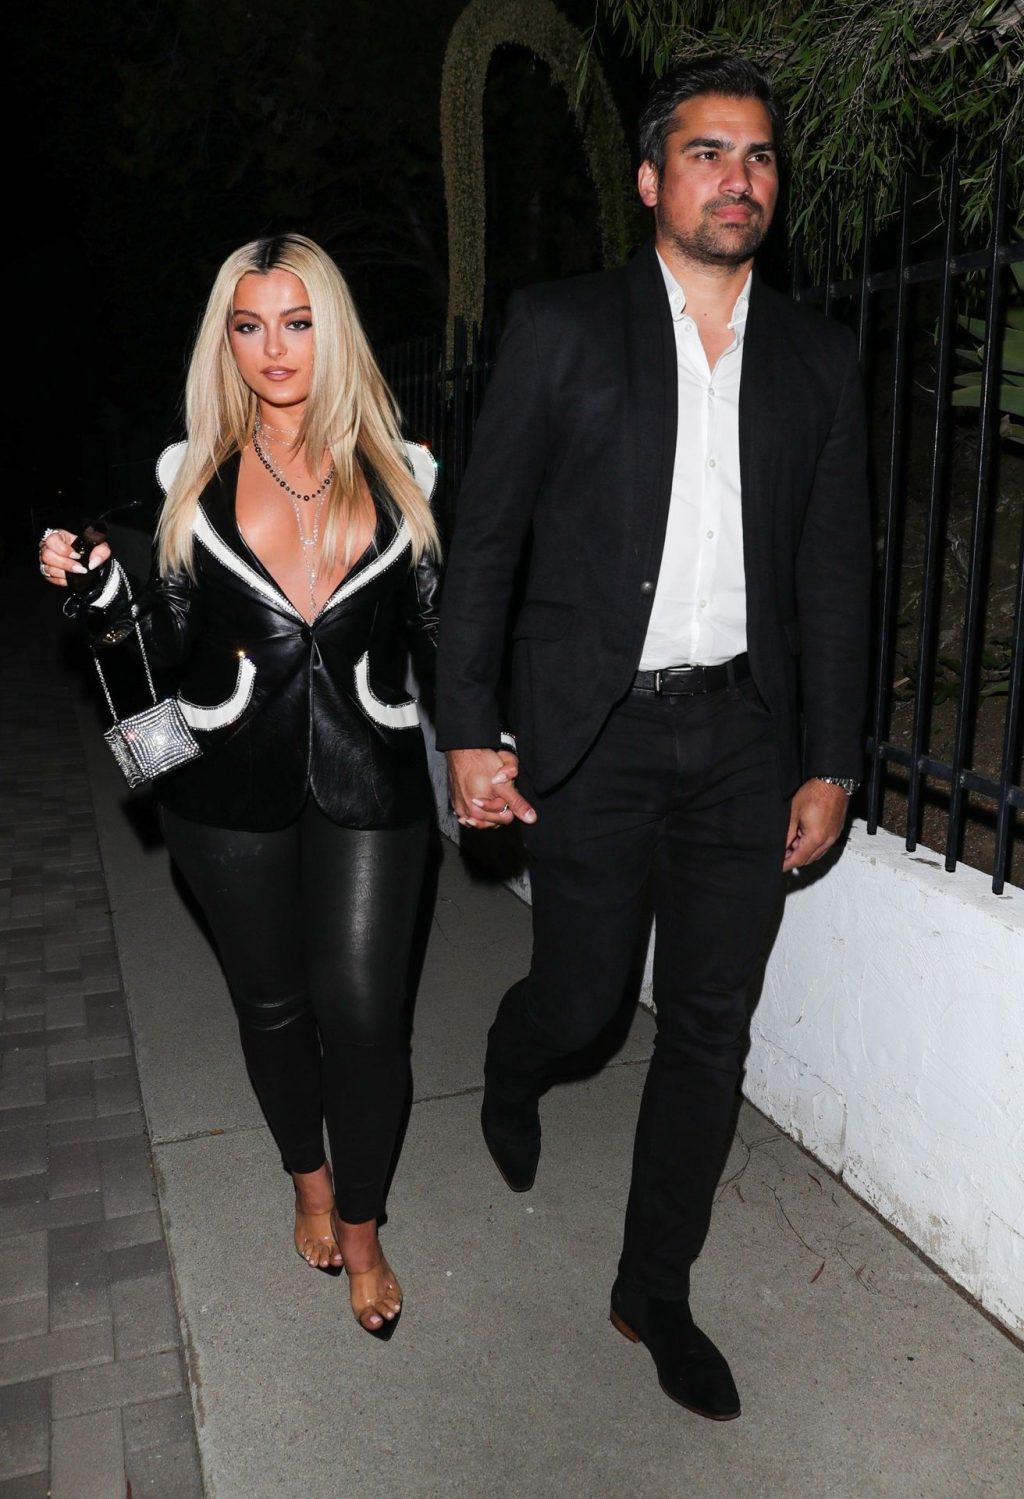 Bebe Rexha Struts Her Stuff in Black Leather While Arriving to Her Album Release Party in Beverly Hills (35 Photos + Video)